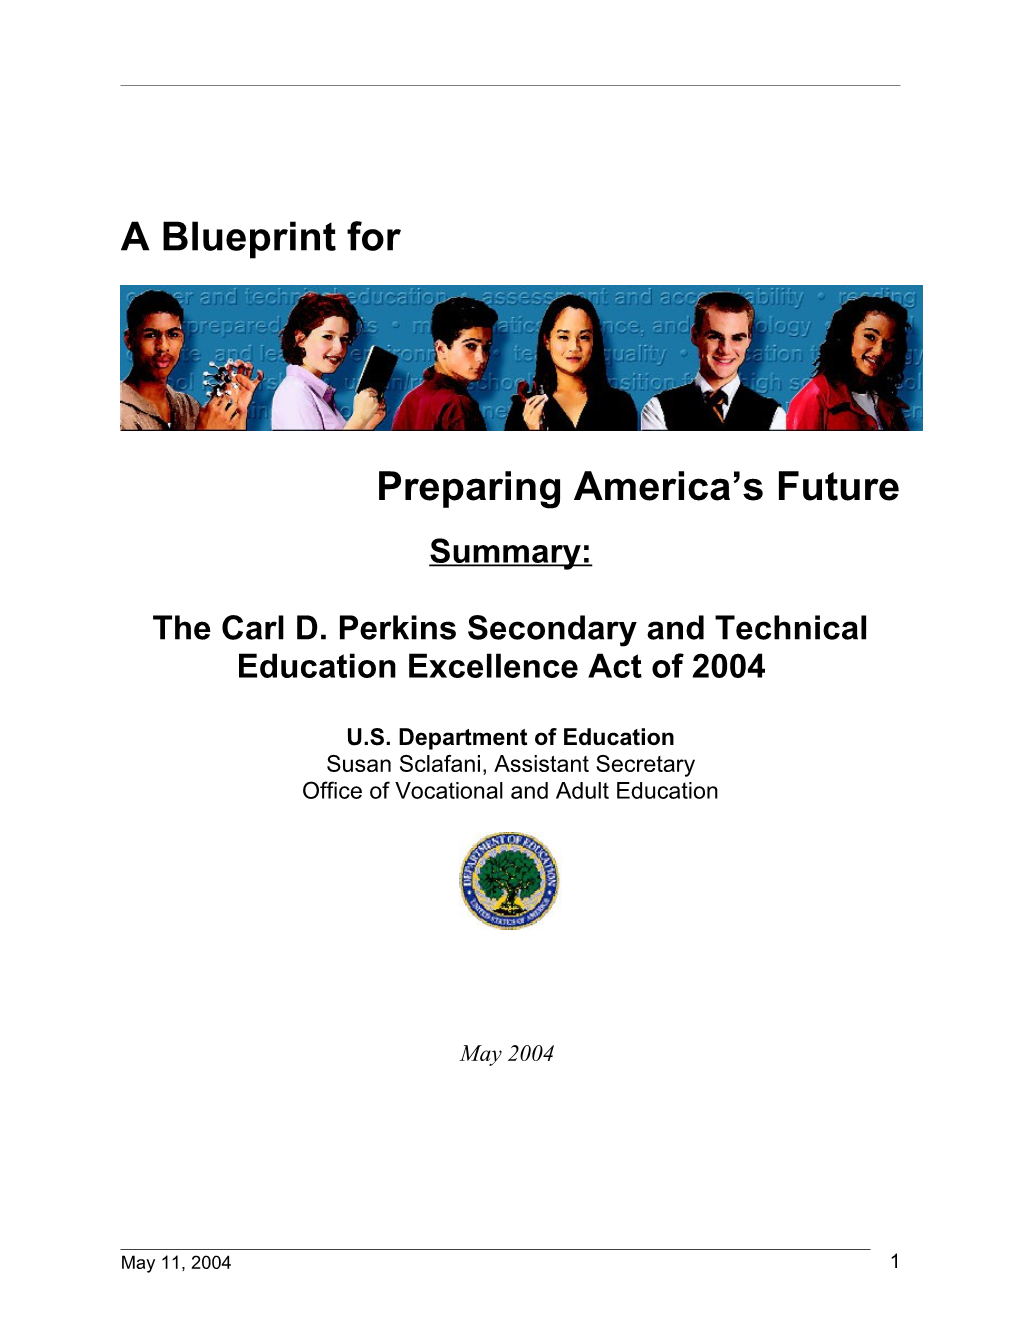 Summary of Proposal for the Carl D. Perkins Secondary and Technical Education Excellence